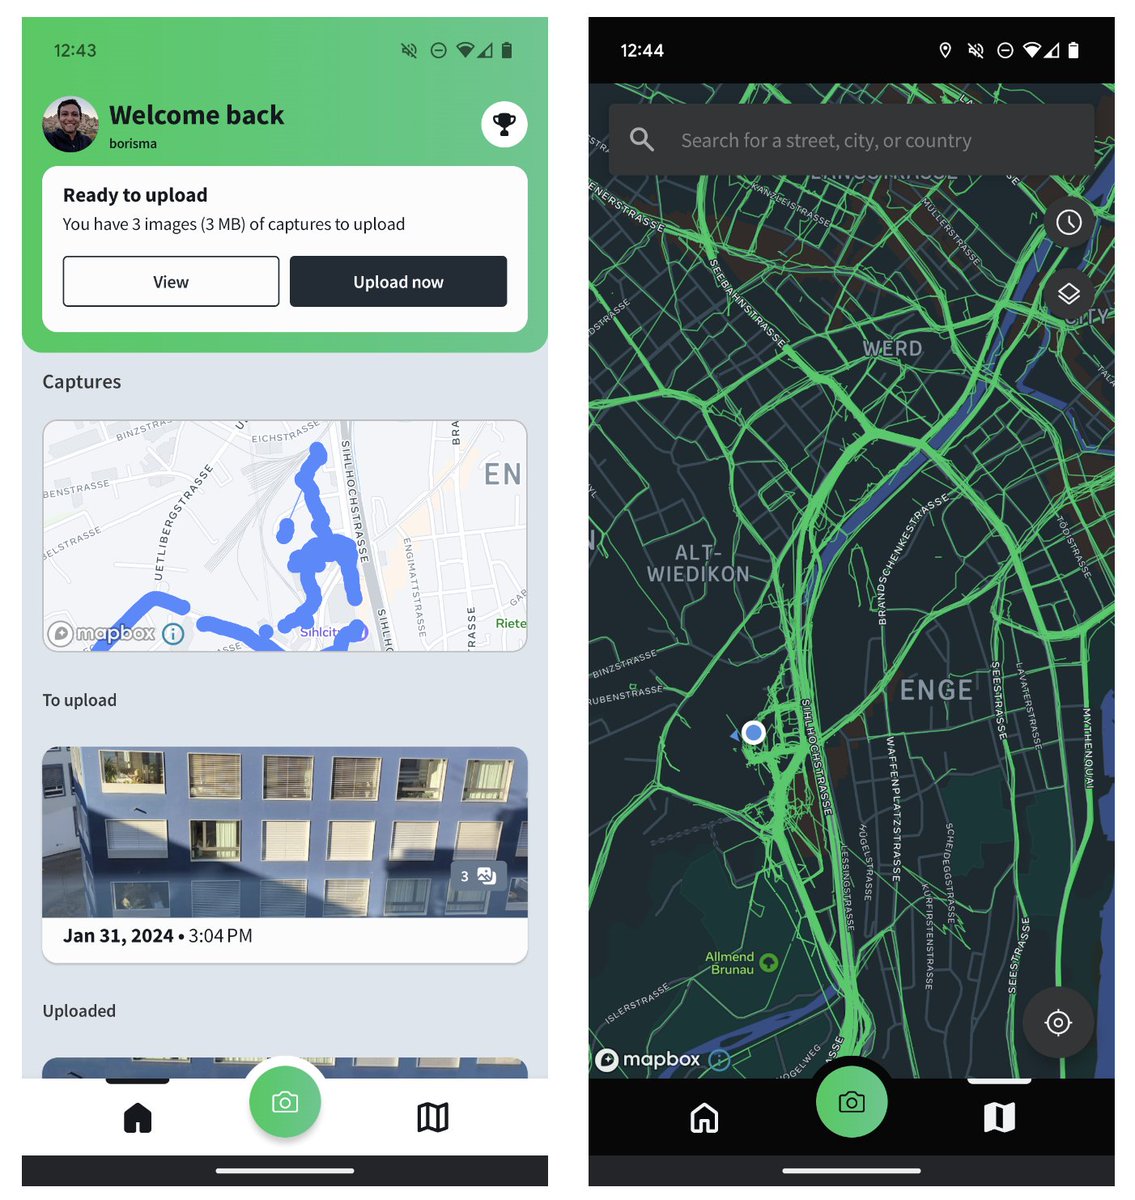 Introducing the all-new Mapillary Android App🎉 The Mapillary Android app has undergone a full redesign to improve ease of use and make capturing and uploading easier than ever. Read our blogpost to learn more about what's new at Mapillary Android App. blog.mapillary.com/update/2024/02…